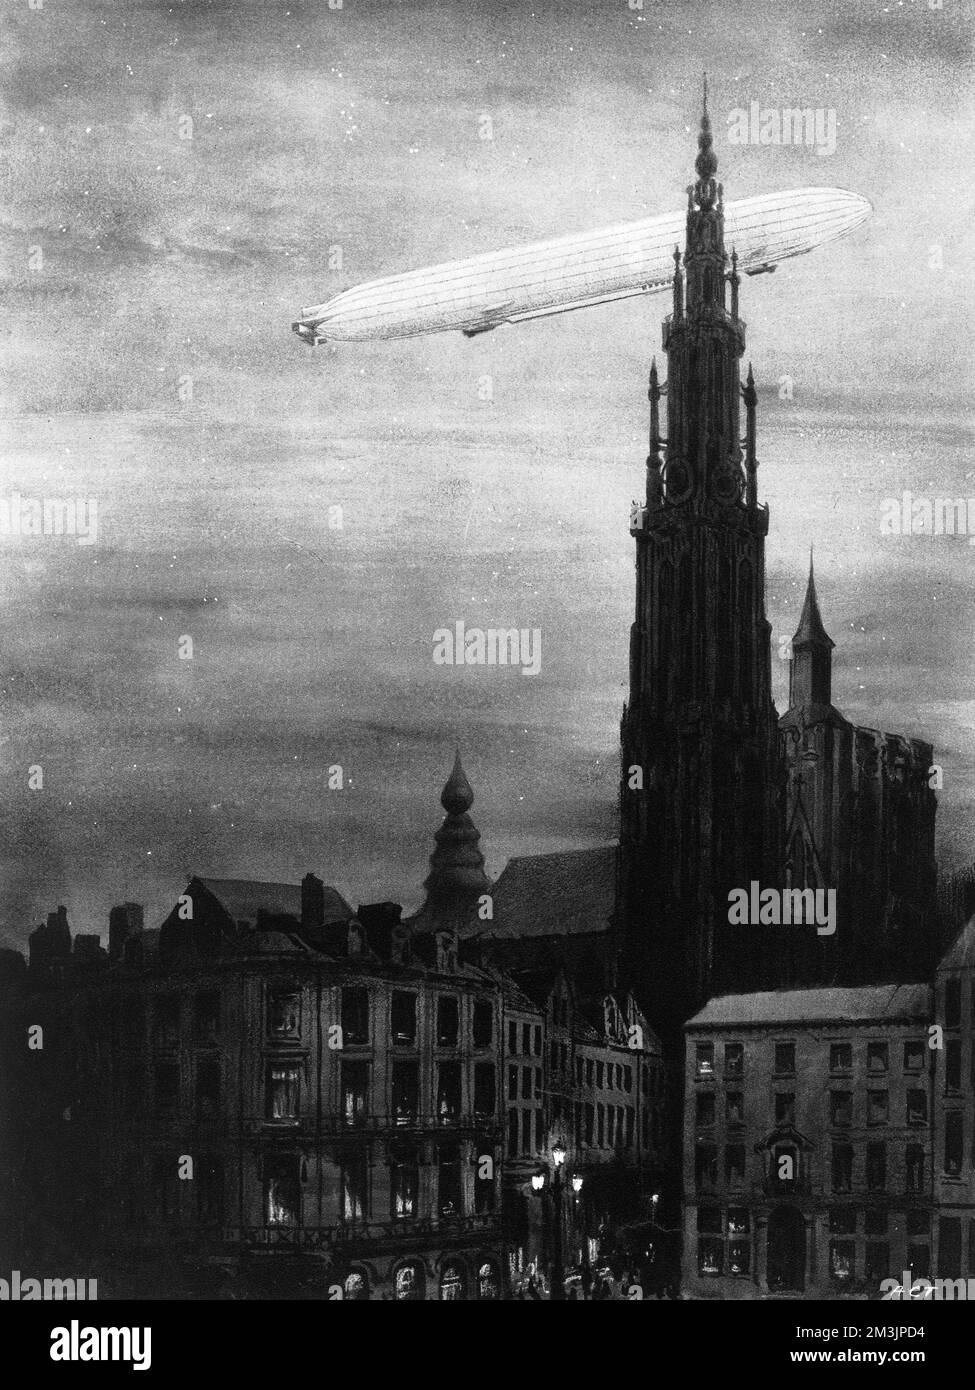 A drawing showing a German dirigible over Antwerp on the night of August 24th &amp; 25th 1914. Against the laws of international warfare, a Zeppelin air-ship flew over the city for the purpose of dropping bombs on civilian targets.  In the event, seven people were killed and twenty injured.  World War I was the first conflict to involve civilians.  As well as French and Belgian targets, the East coast towns of Great Britain would suffer bombings during the course of the war.     Date: September 5th 1914 Stock Photo